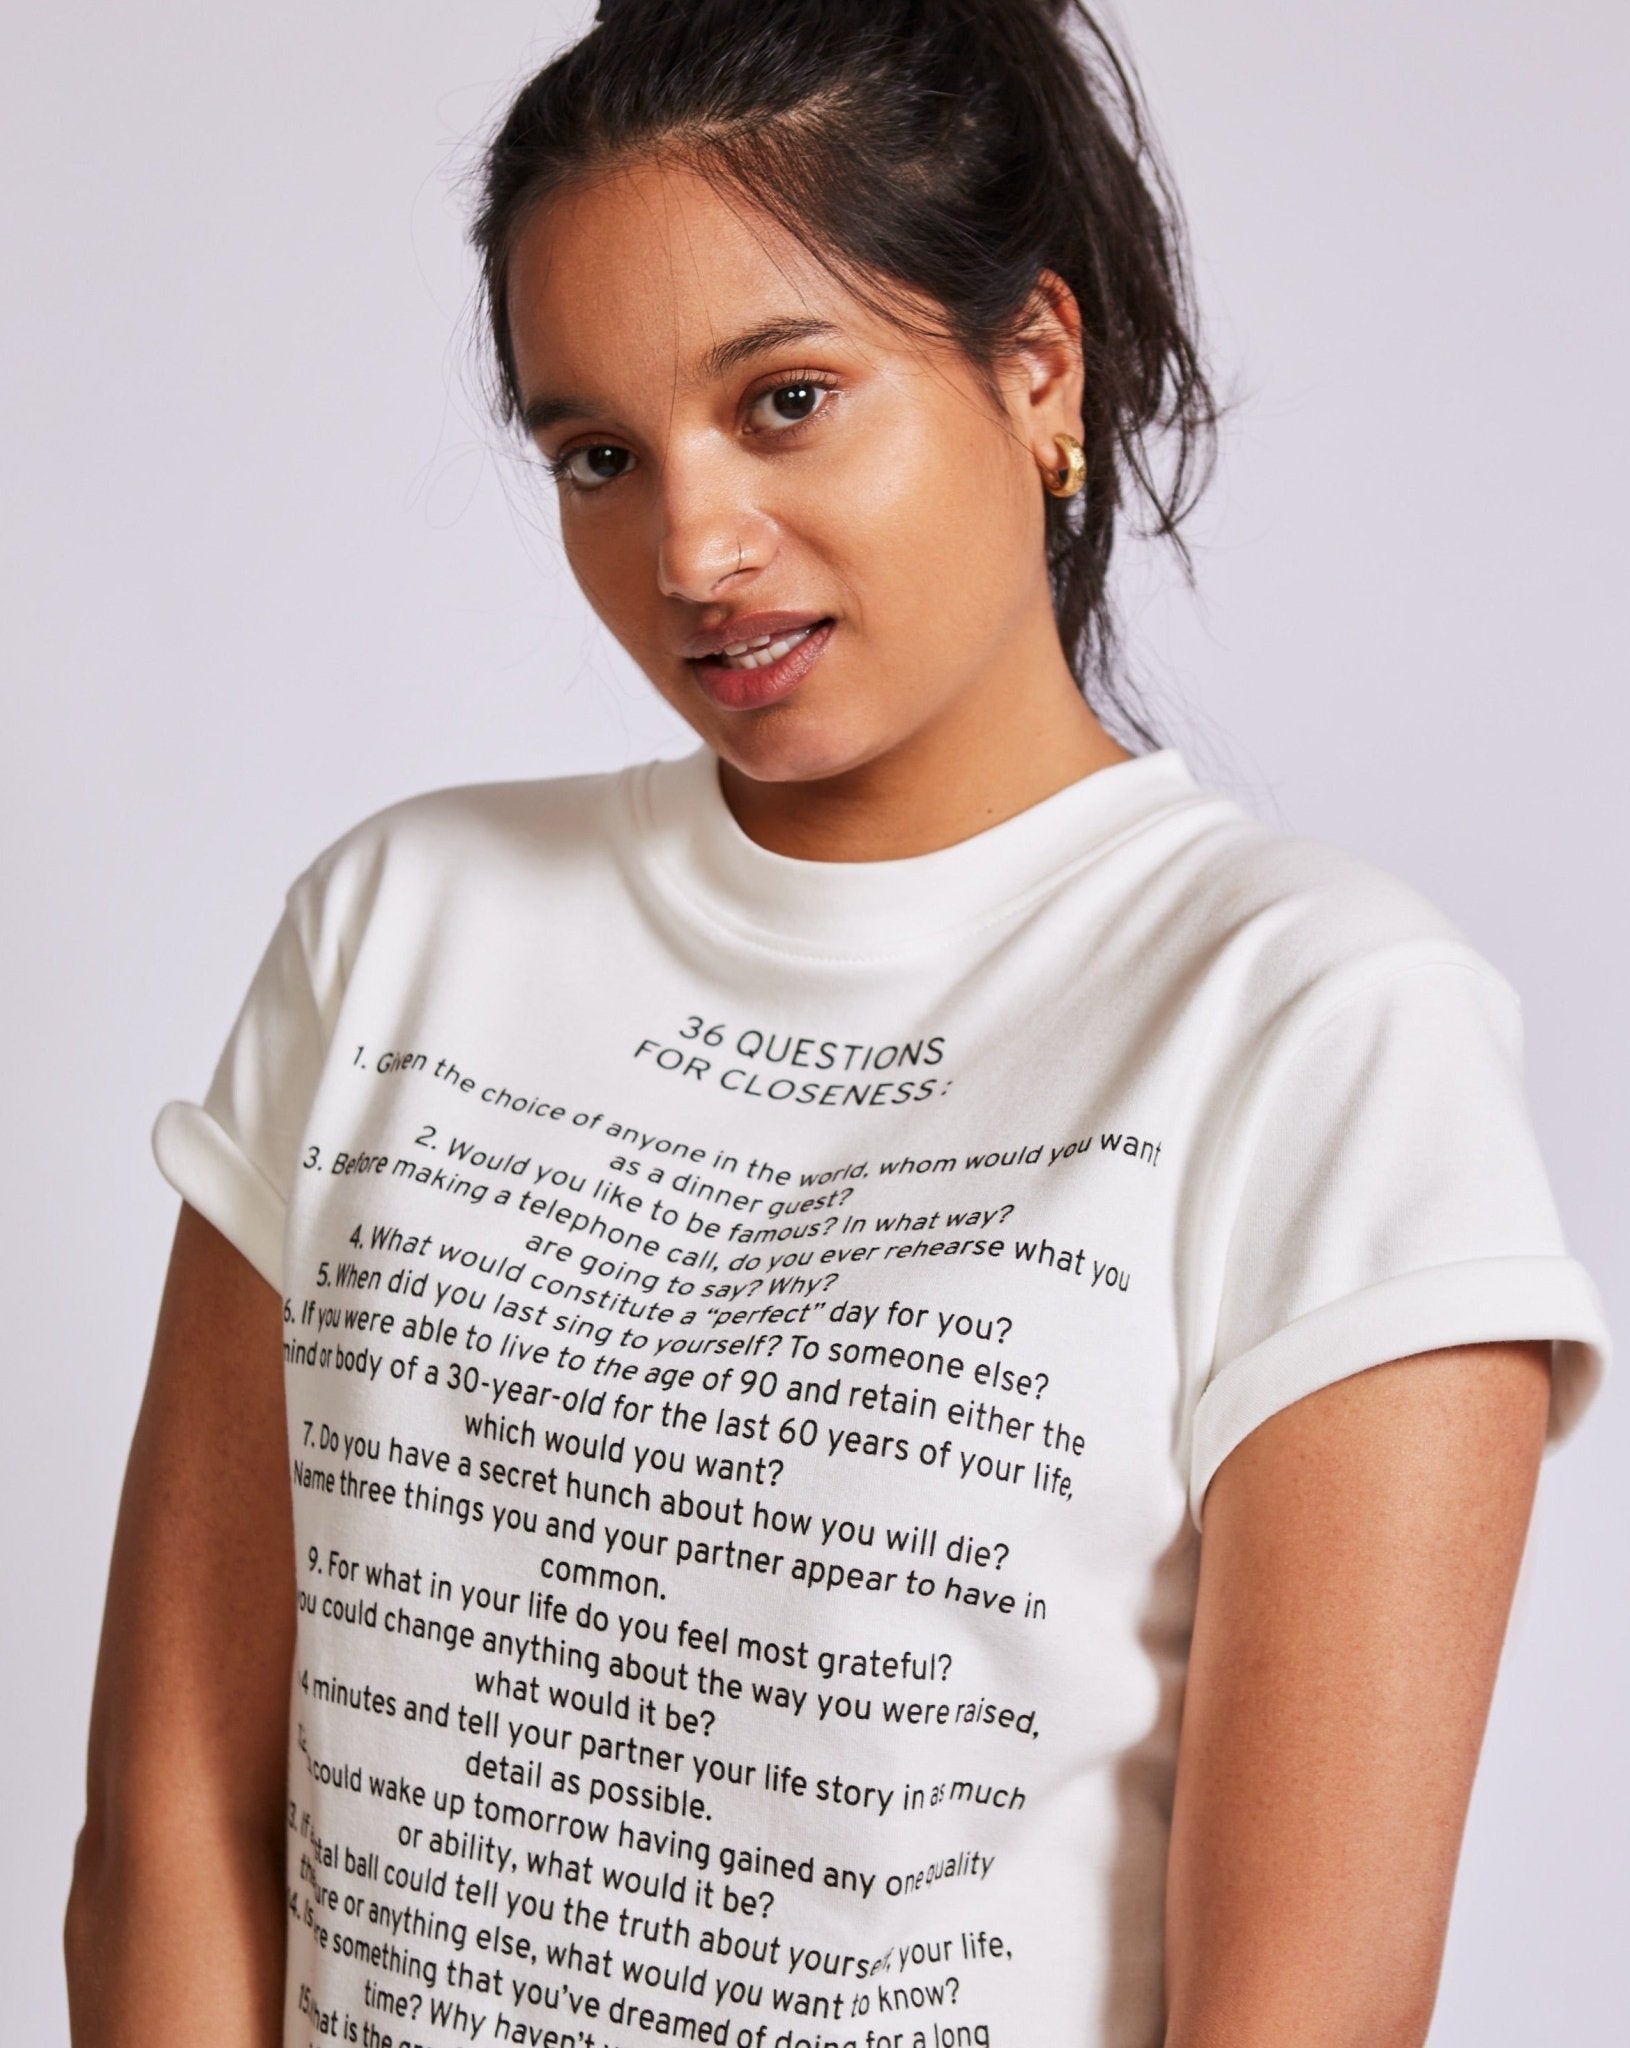 36 Questions for Closeness Boxy T-Shirt - OBLIVIOUS?